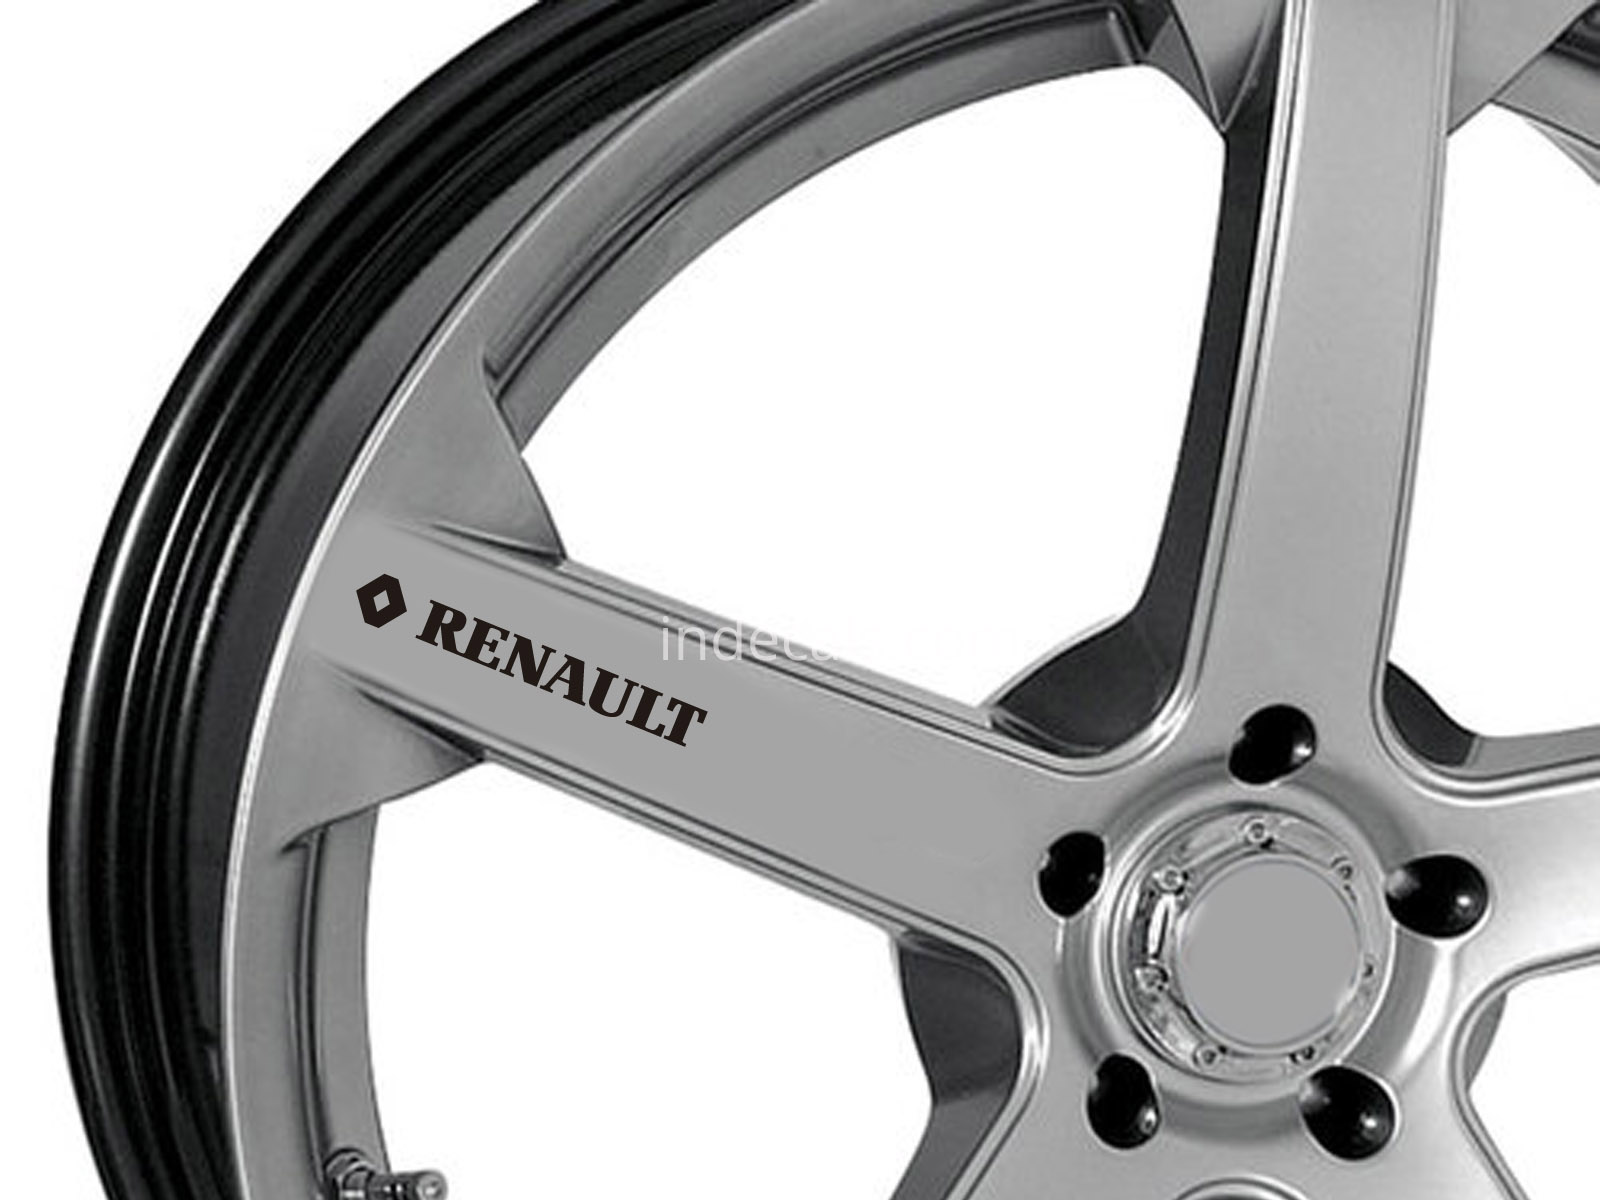 6 x Renault Stickers for Wheels - Black